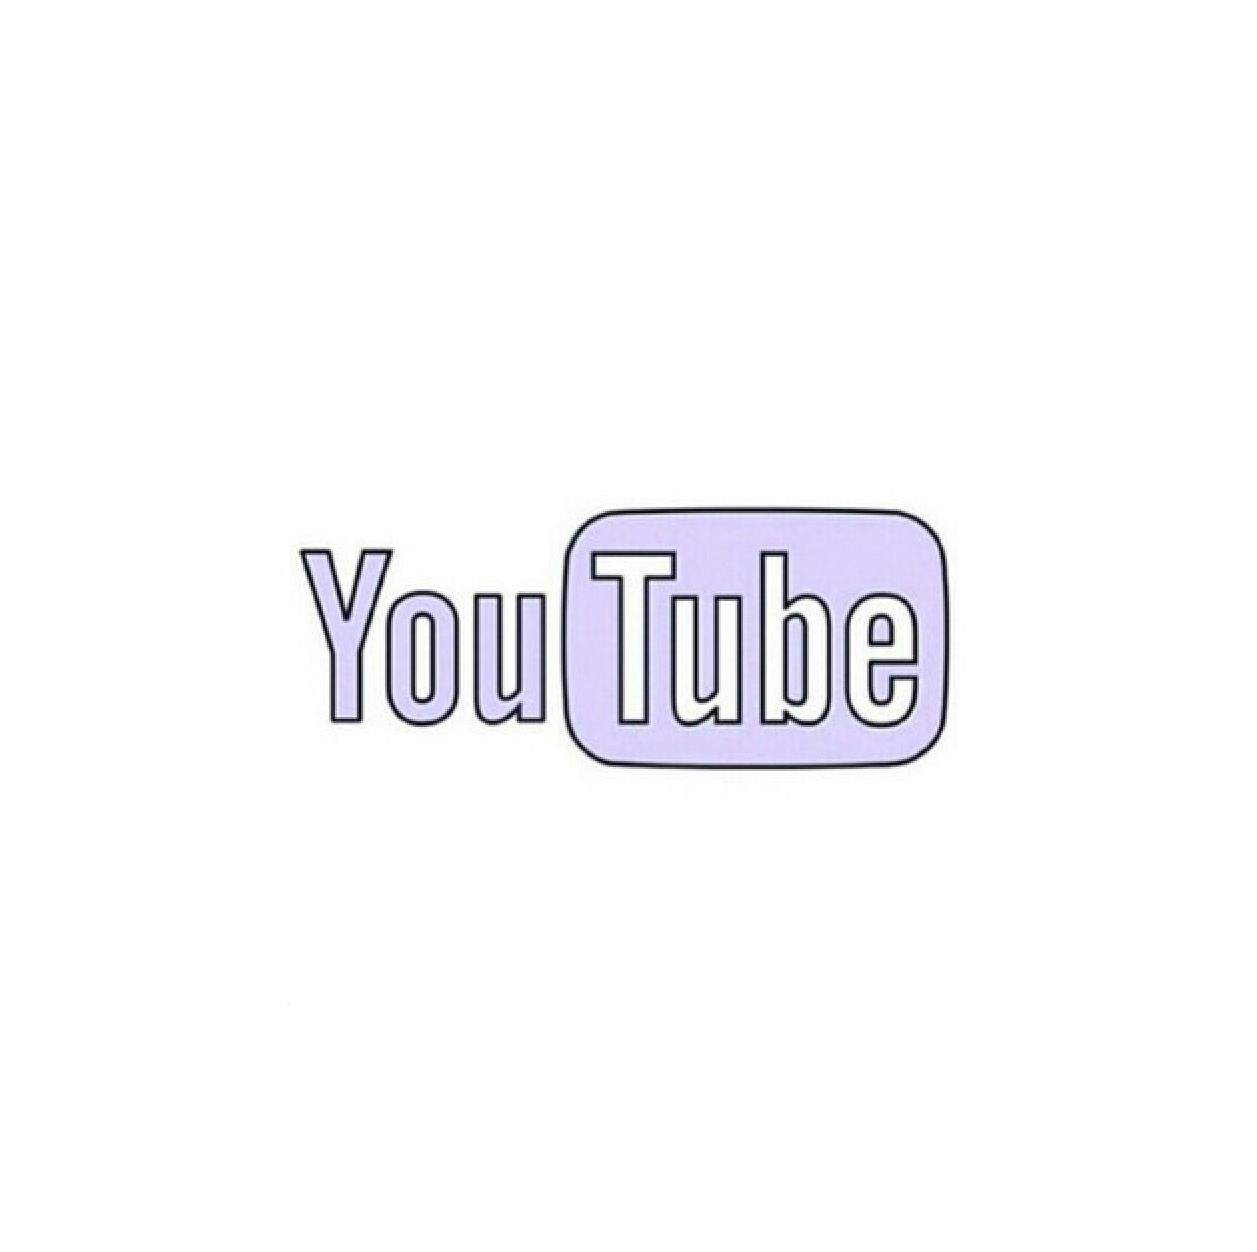 YouTube is probably the best thing that was ever created. Youtube logo, Snapchat logo, iPhone wallpaper tumblr aesthetic